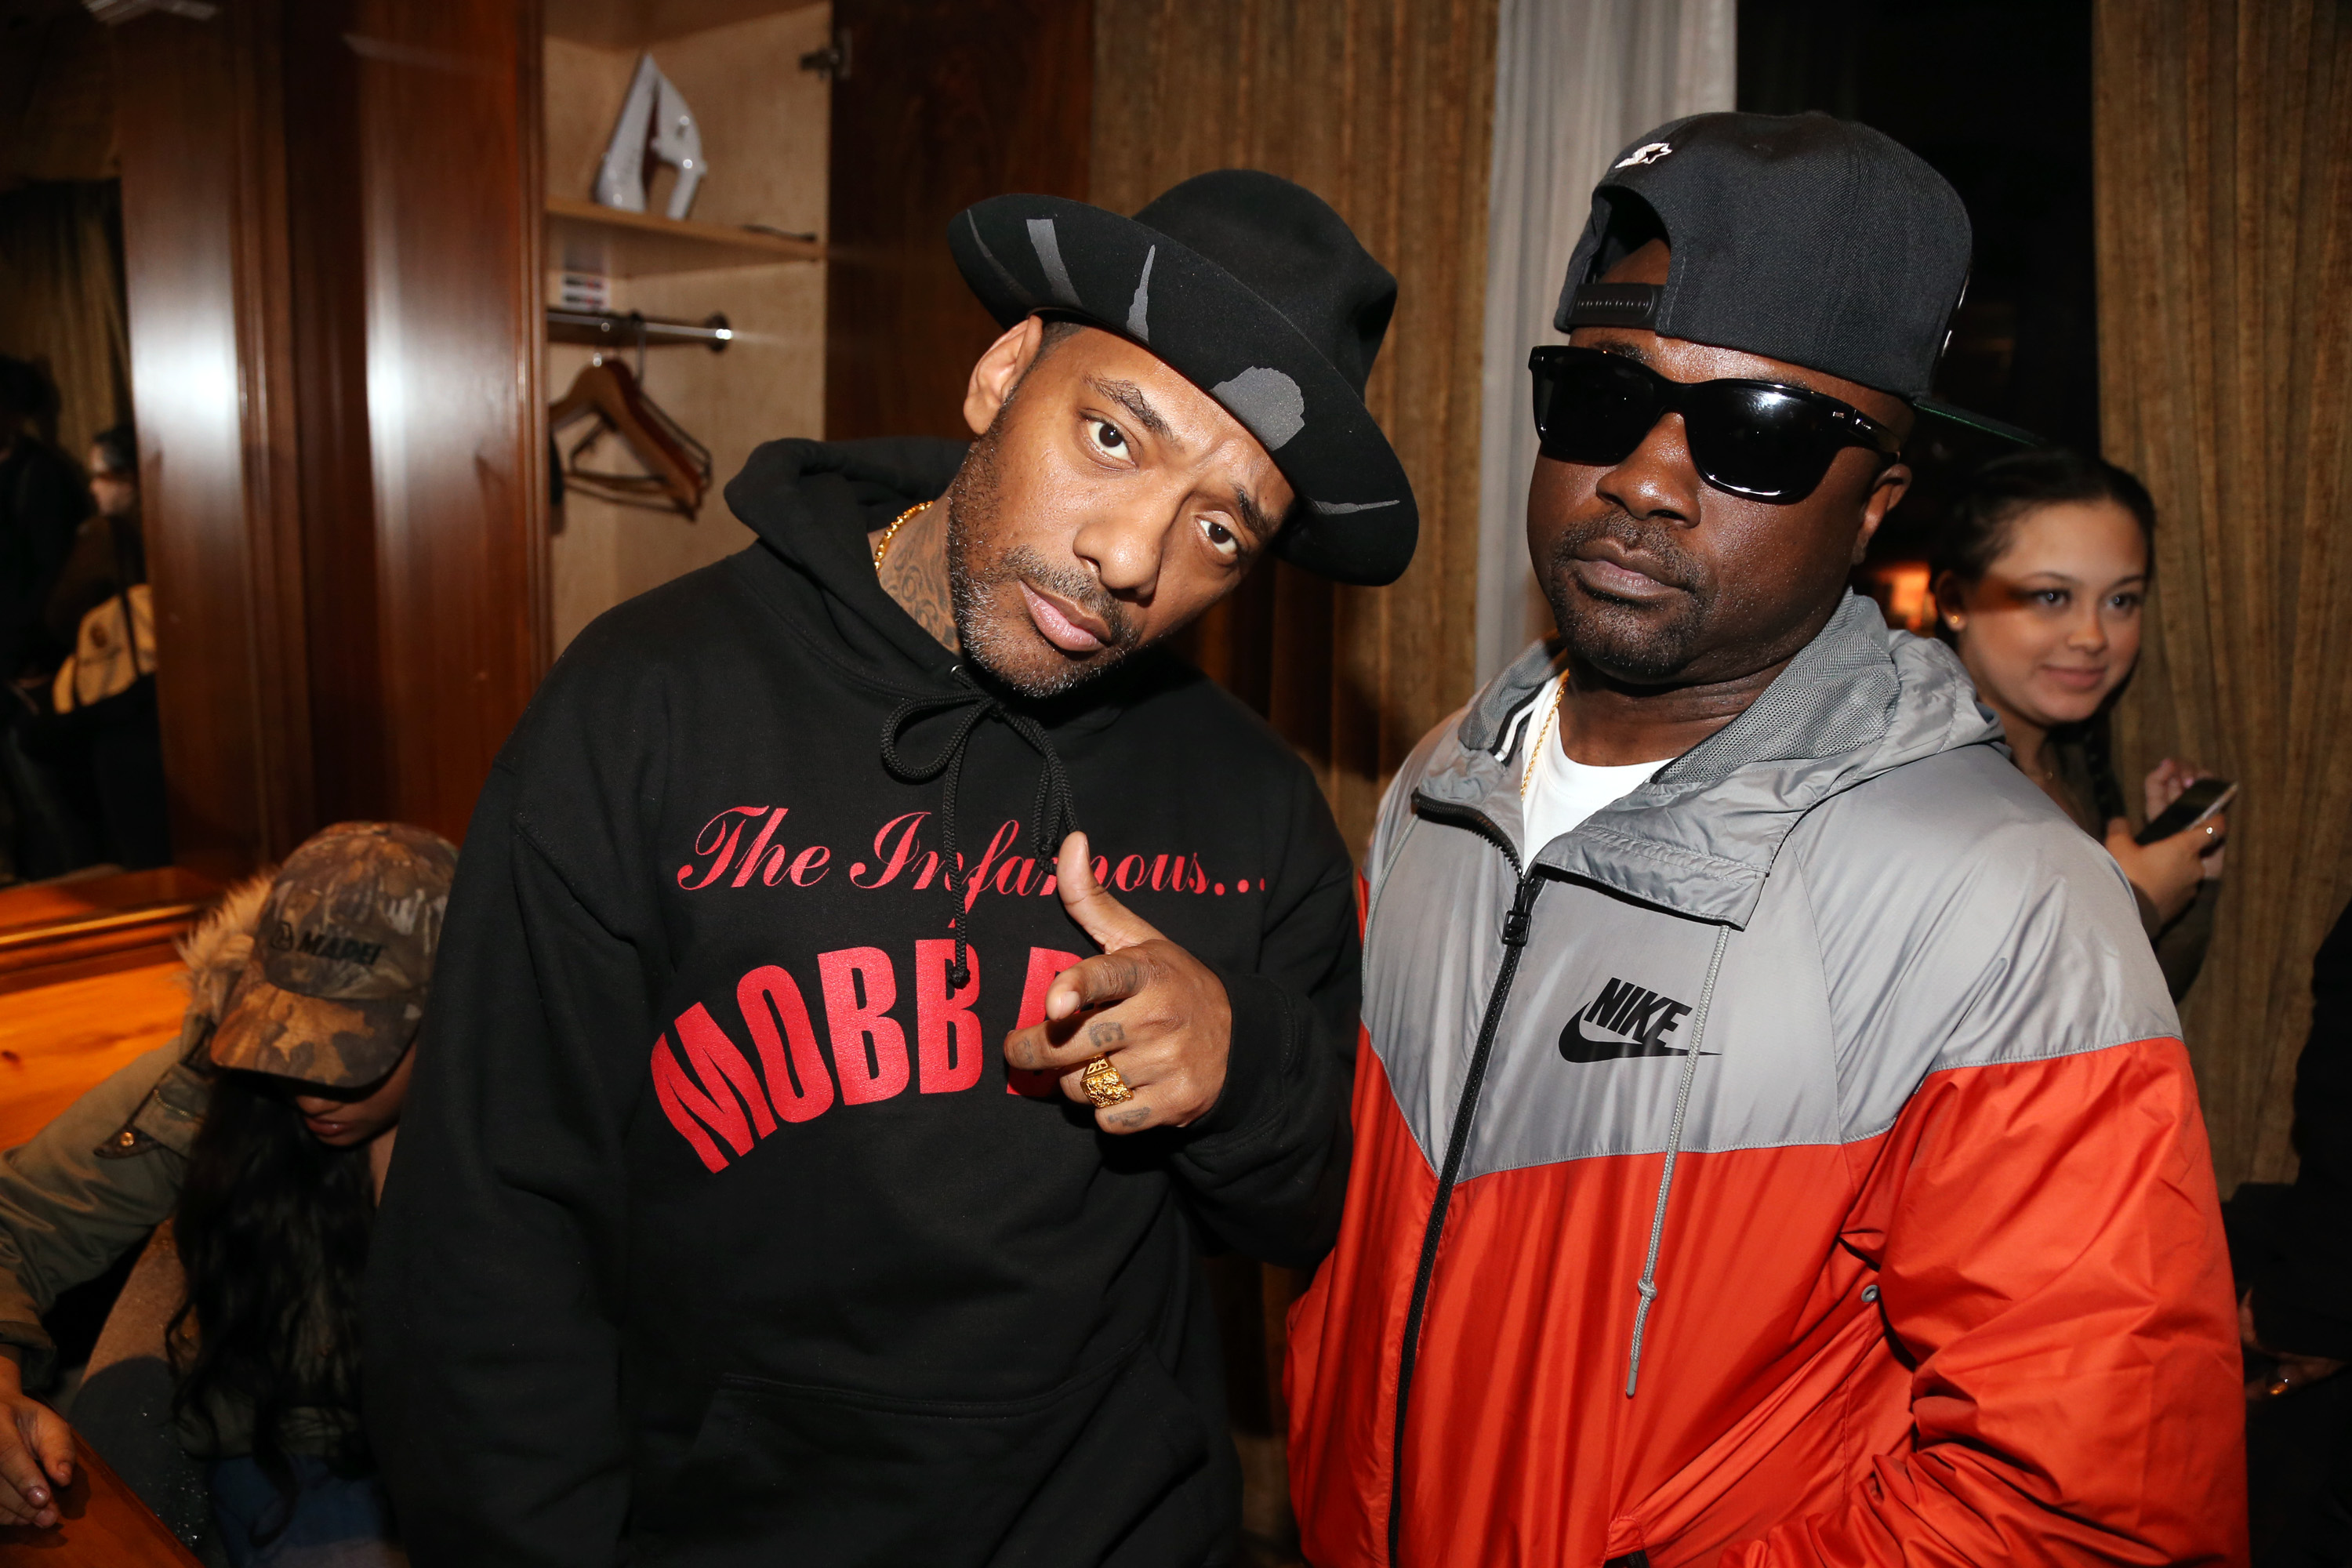 NEW YORK, NEW YORK - APRIL 12: (L-R) Prodigy and Havoc aka hip hop duo Mobb Deep backstage at Blue Note Jazz Club on April 12, 2016, in New York City. (Photo by Johnny Nunez/WireImage)